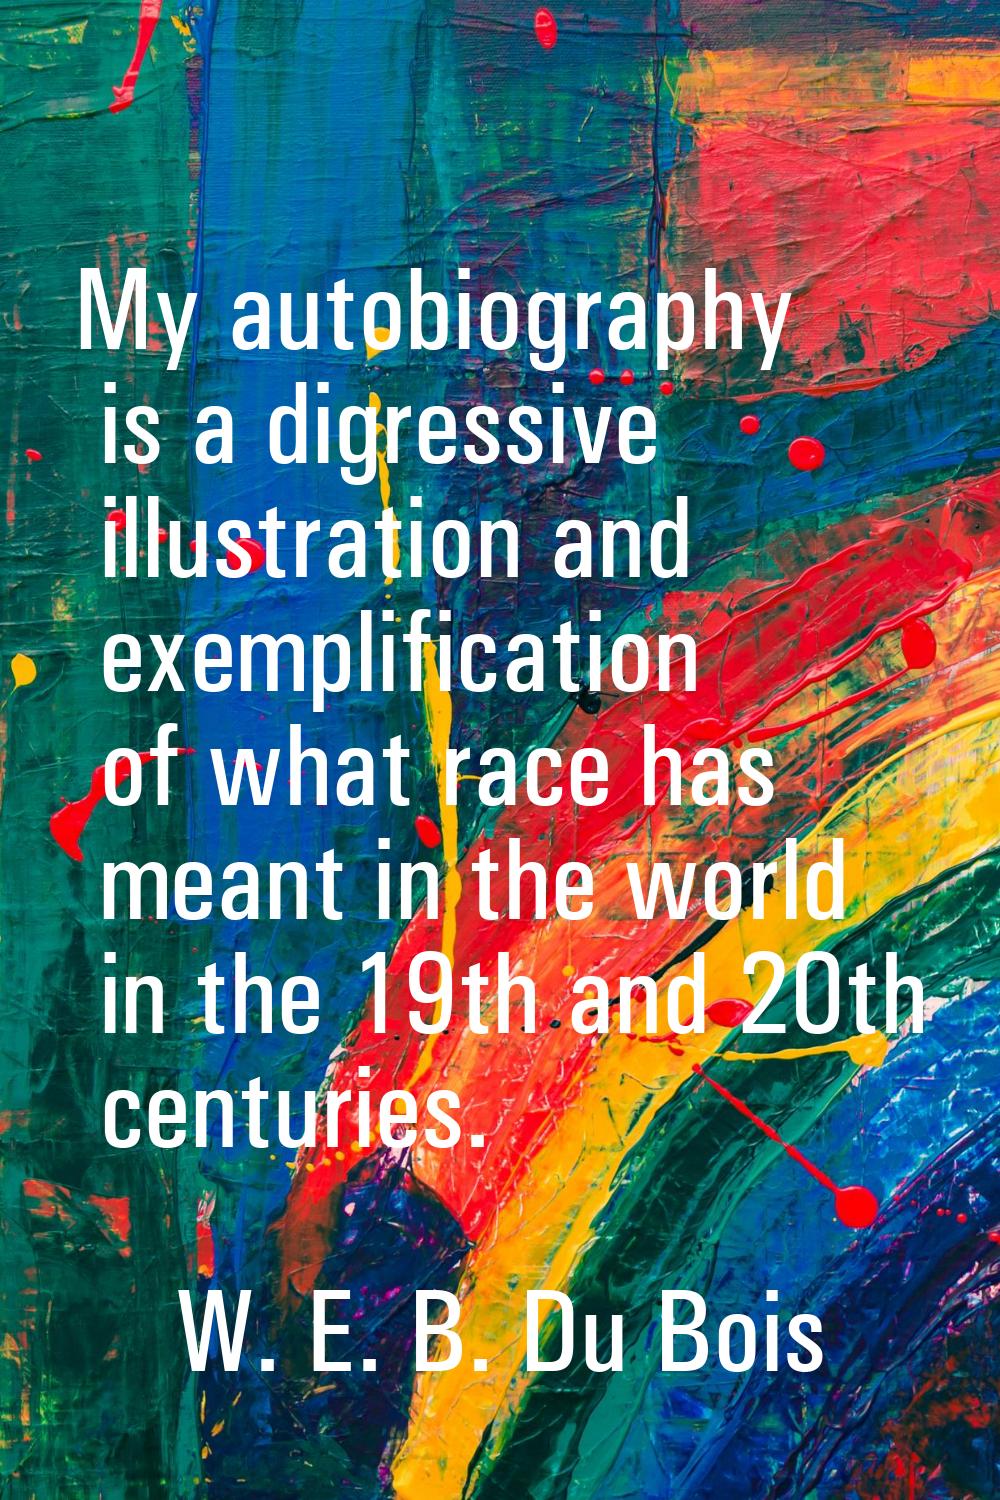 My autobiography is a digressive illustration and exemplification of what race has meant in the wor